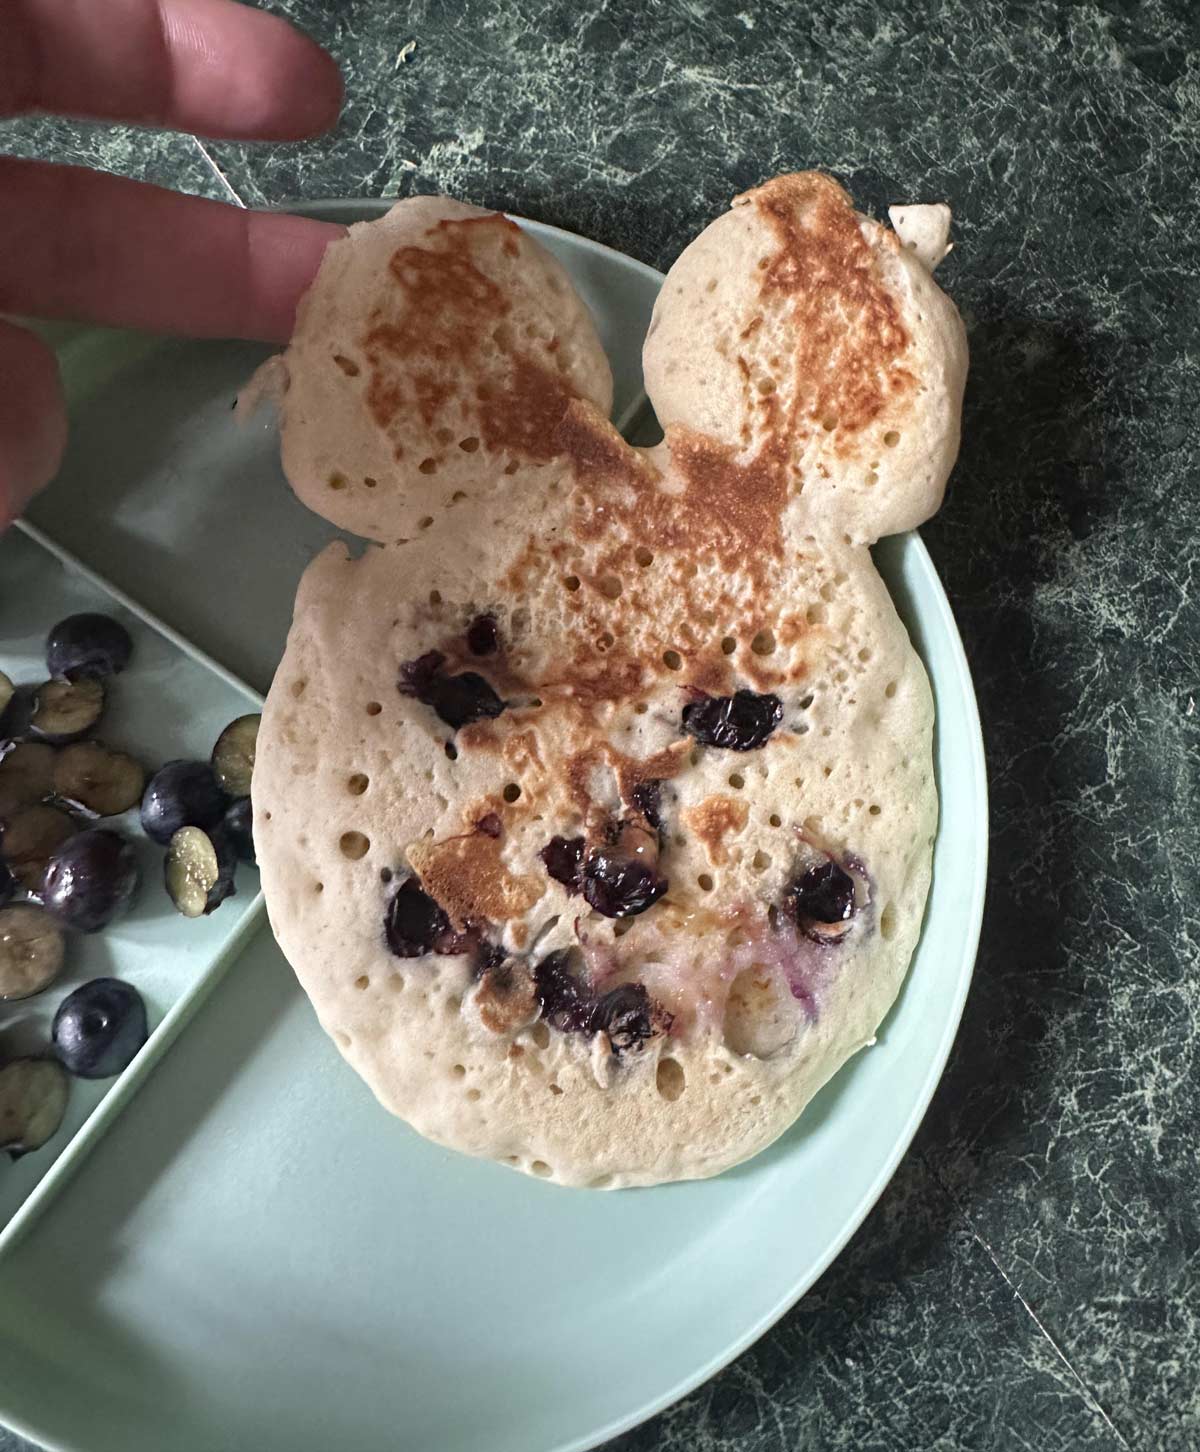 Tried to make my daughter a Mickey Mouse pancake, instead I created nightmare fuel